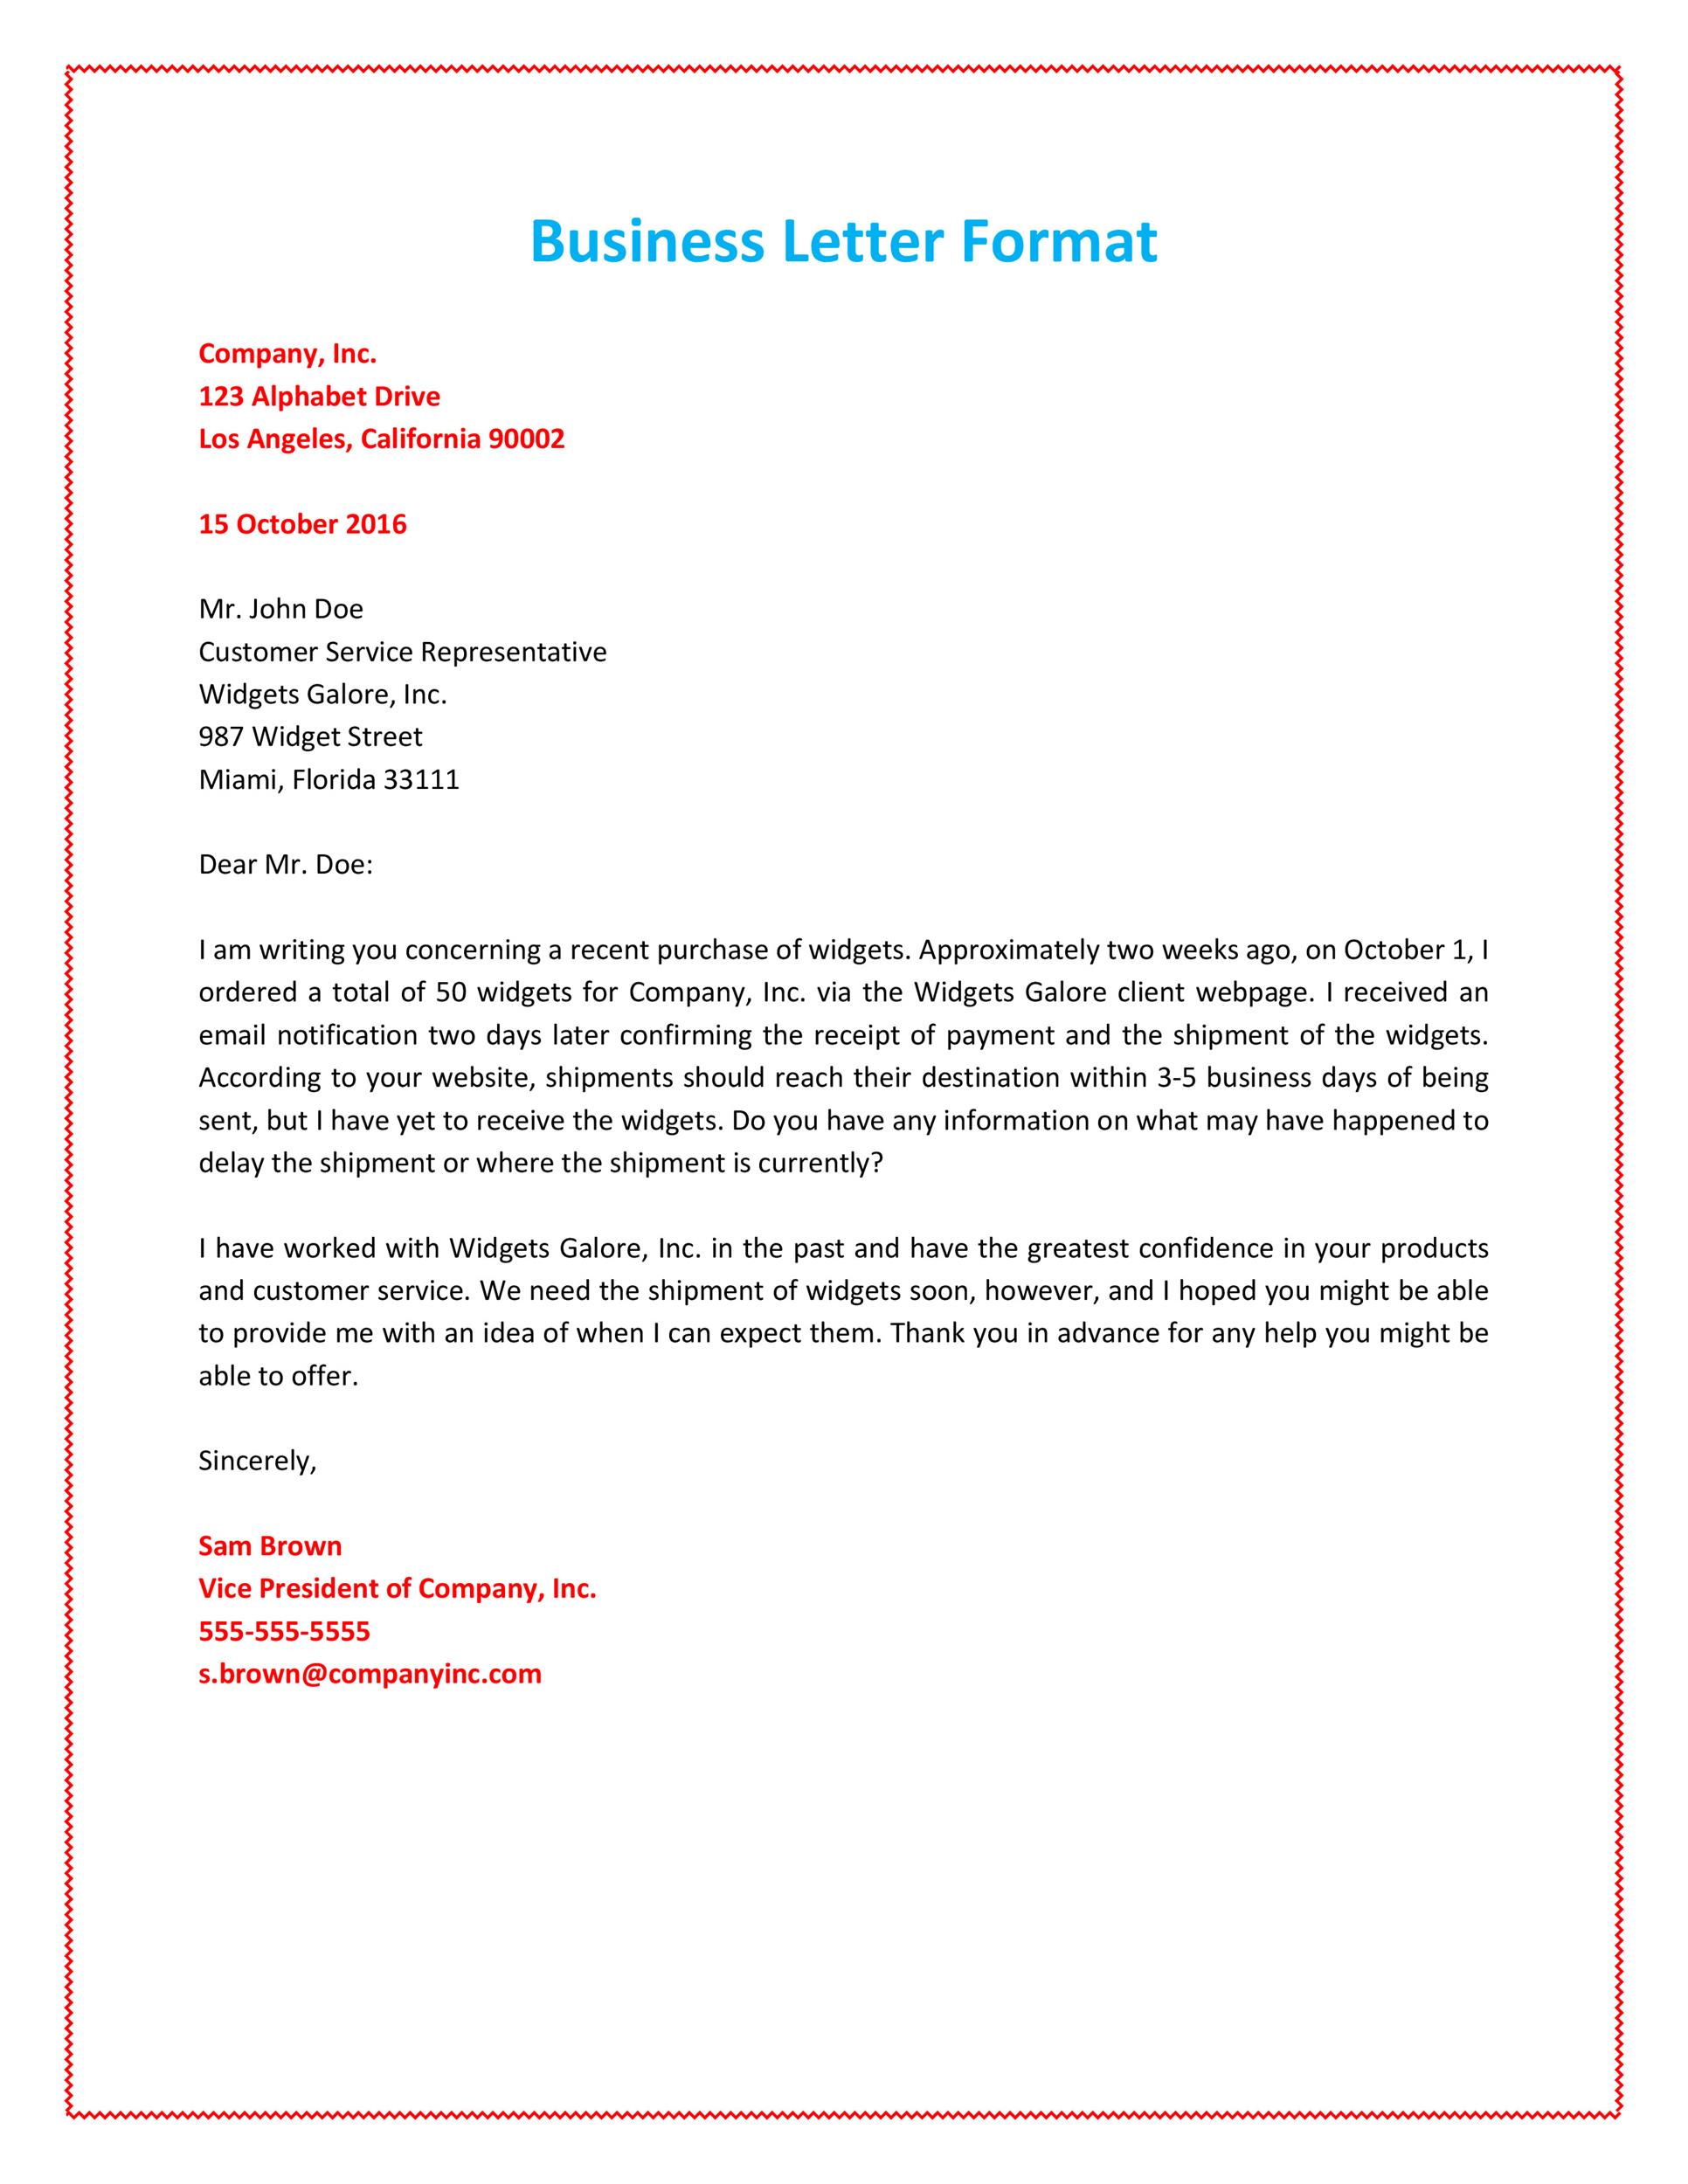 Letter To Attorney, Stating Decision To Retain That Attorney